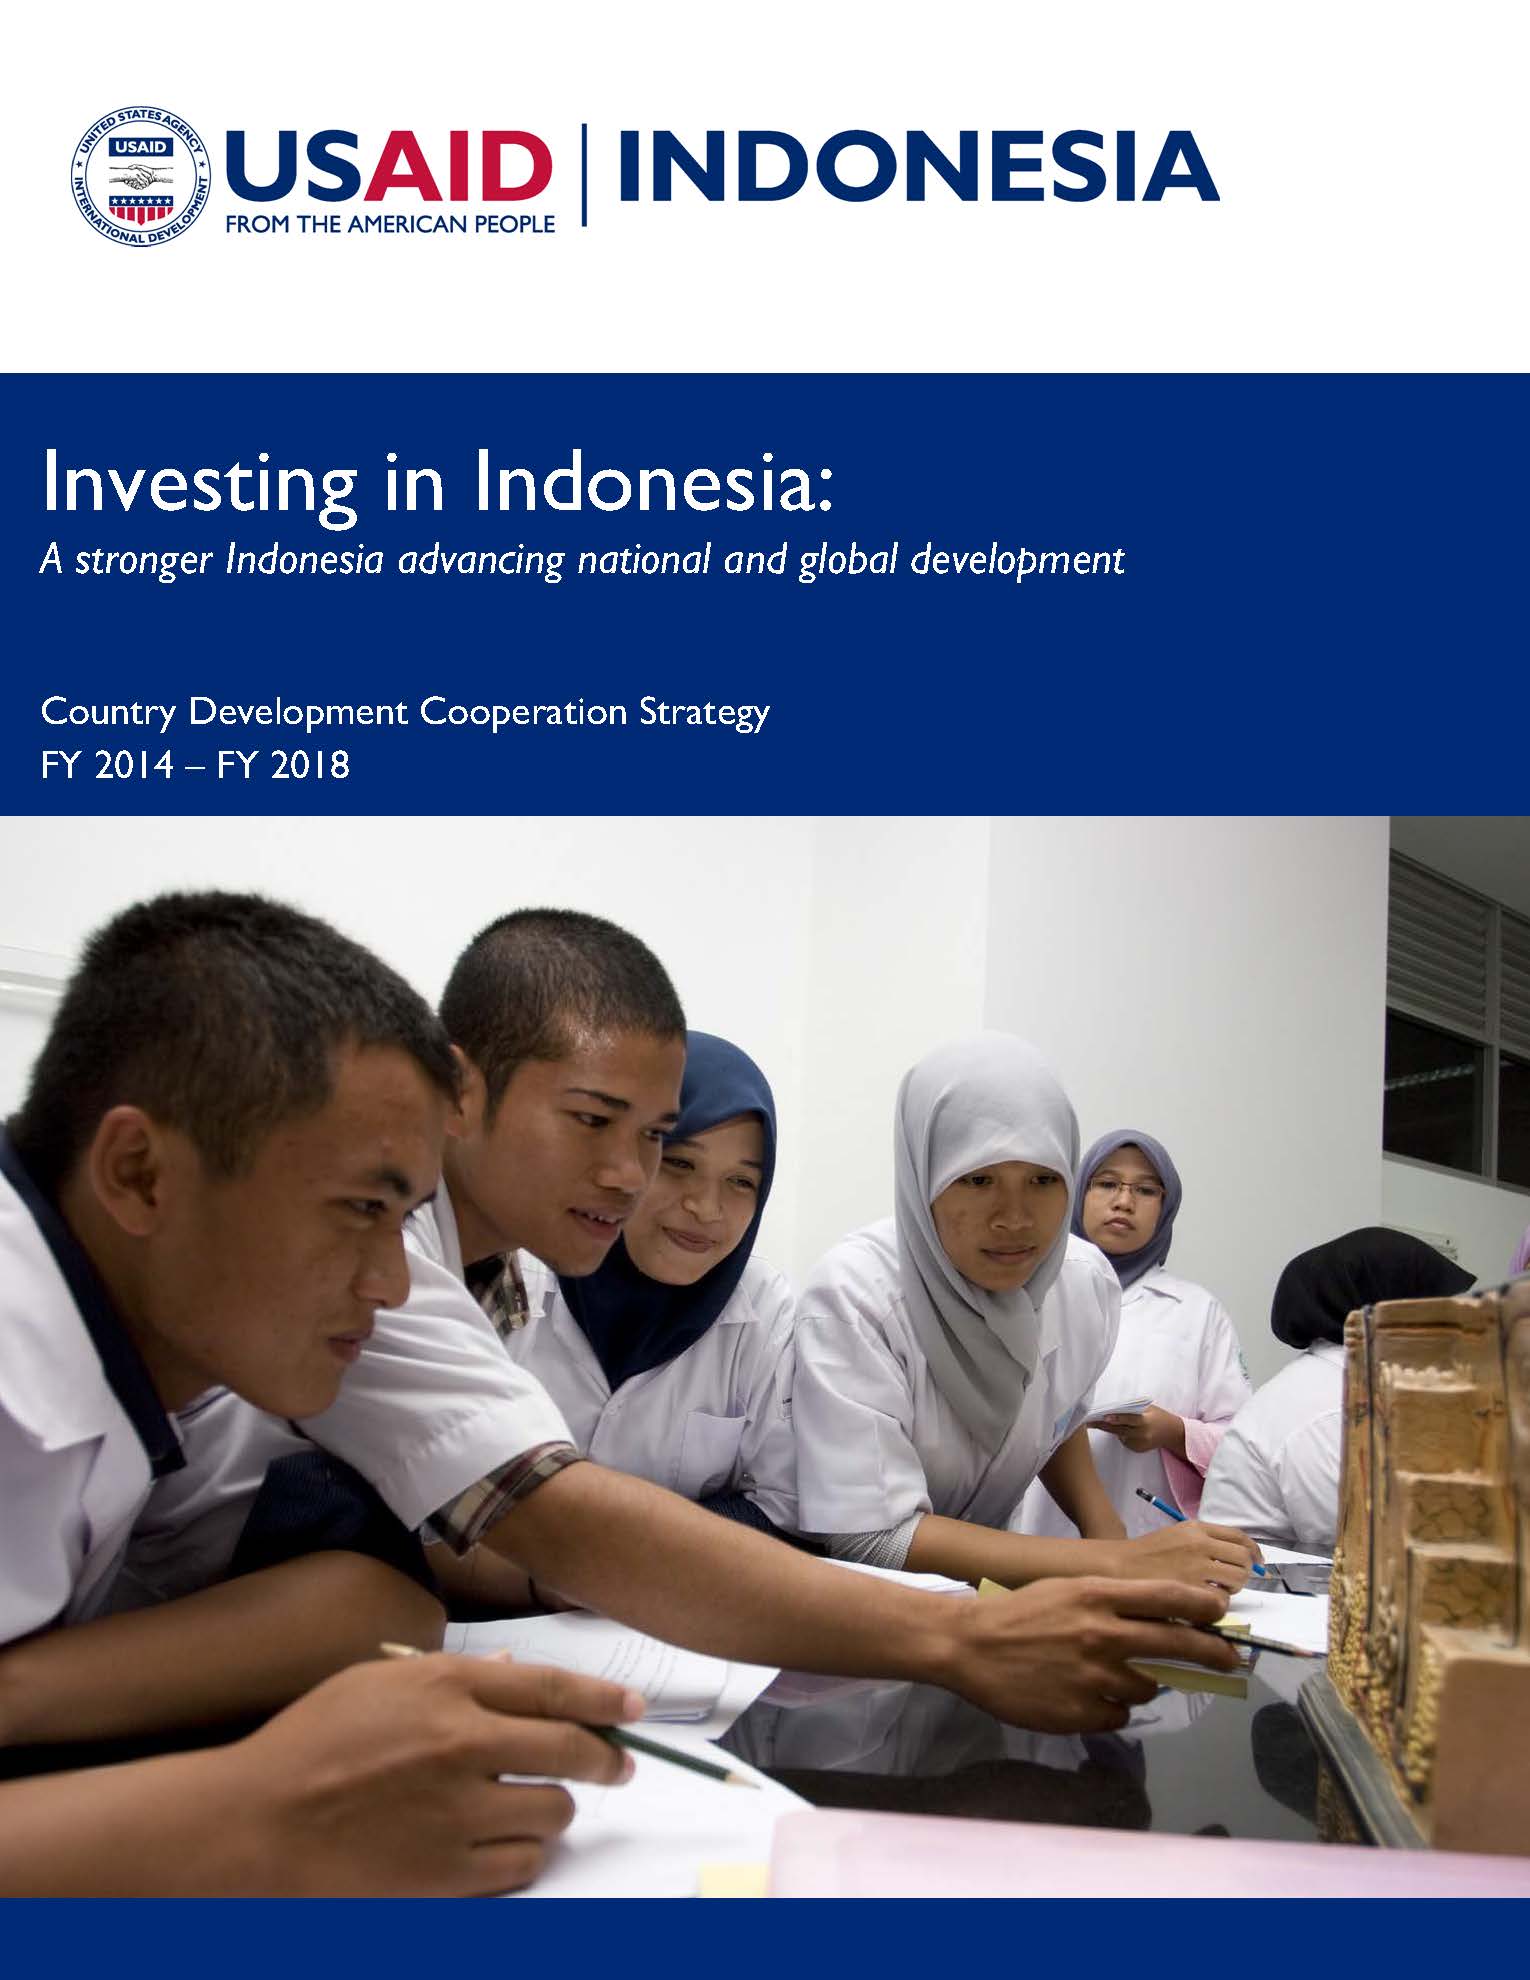  Indonesia Country Development Cooperation Strategy 2014-2018